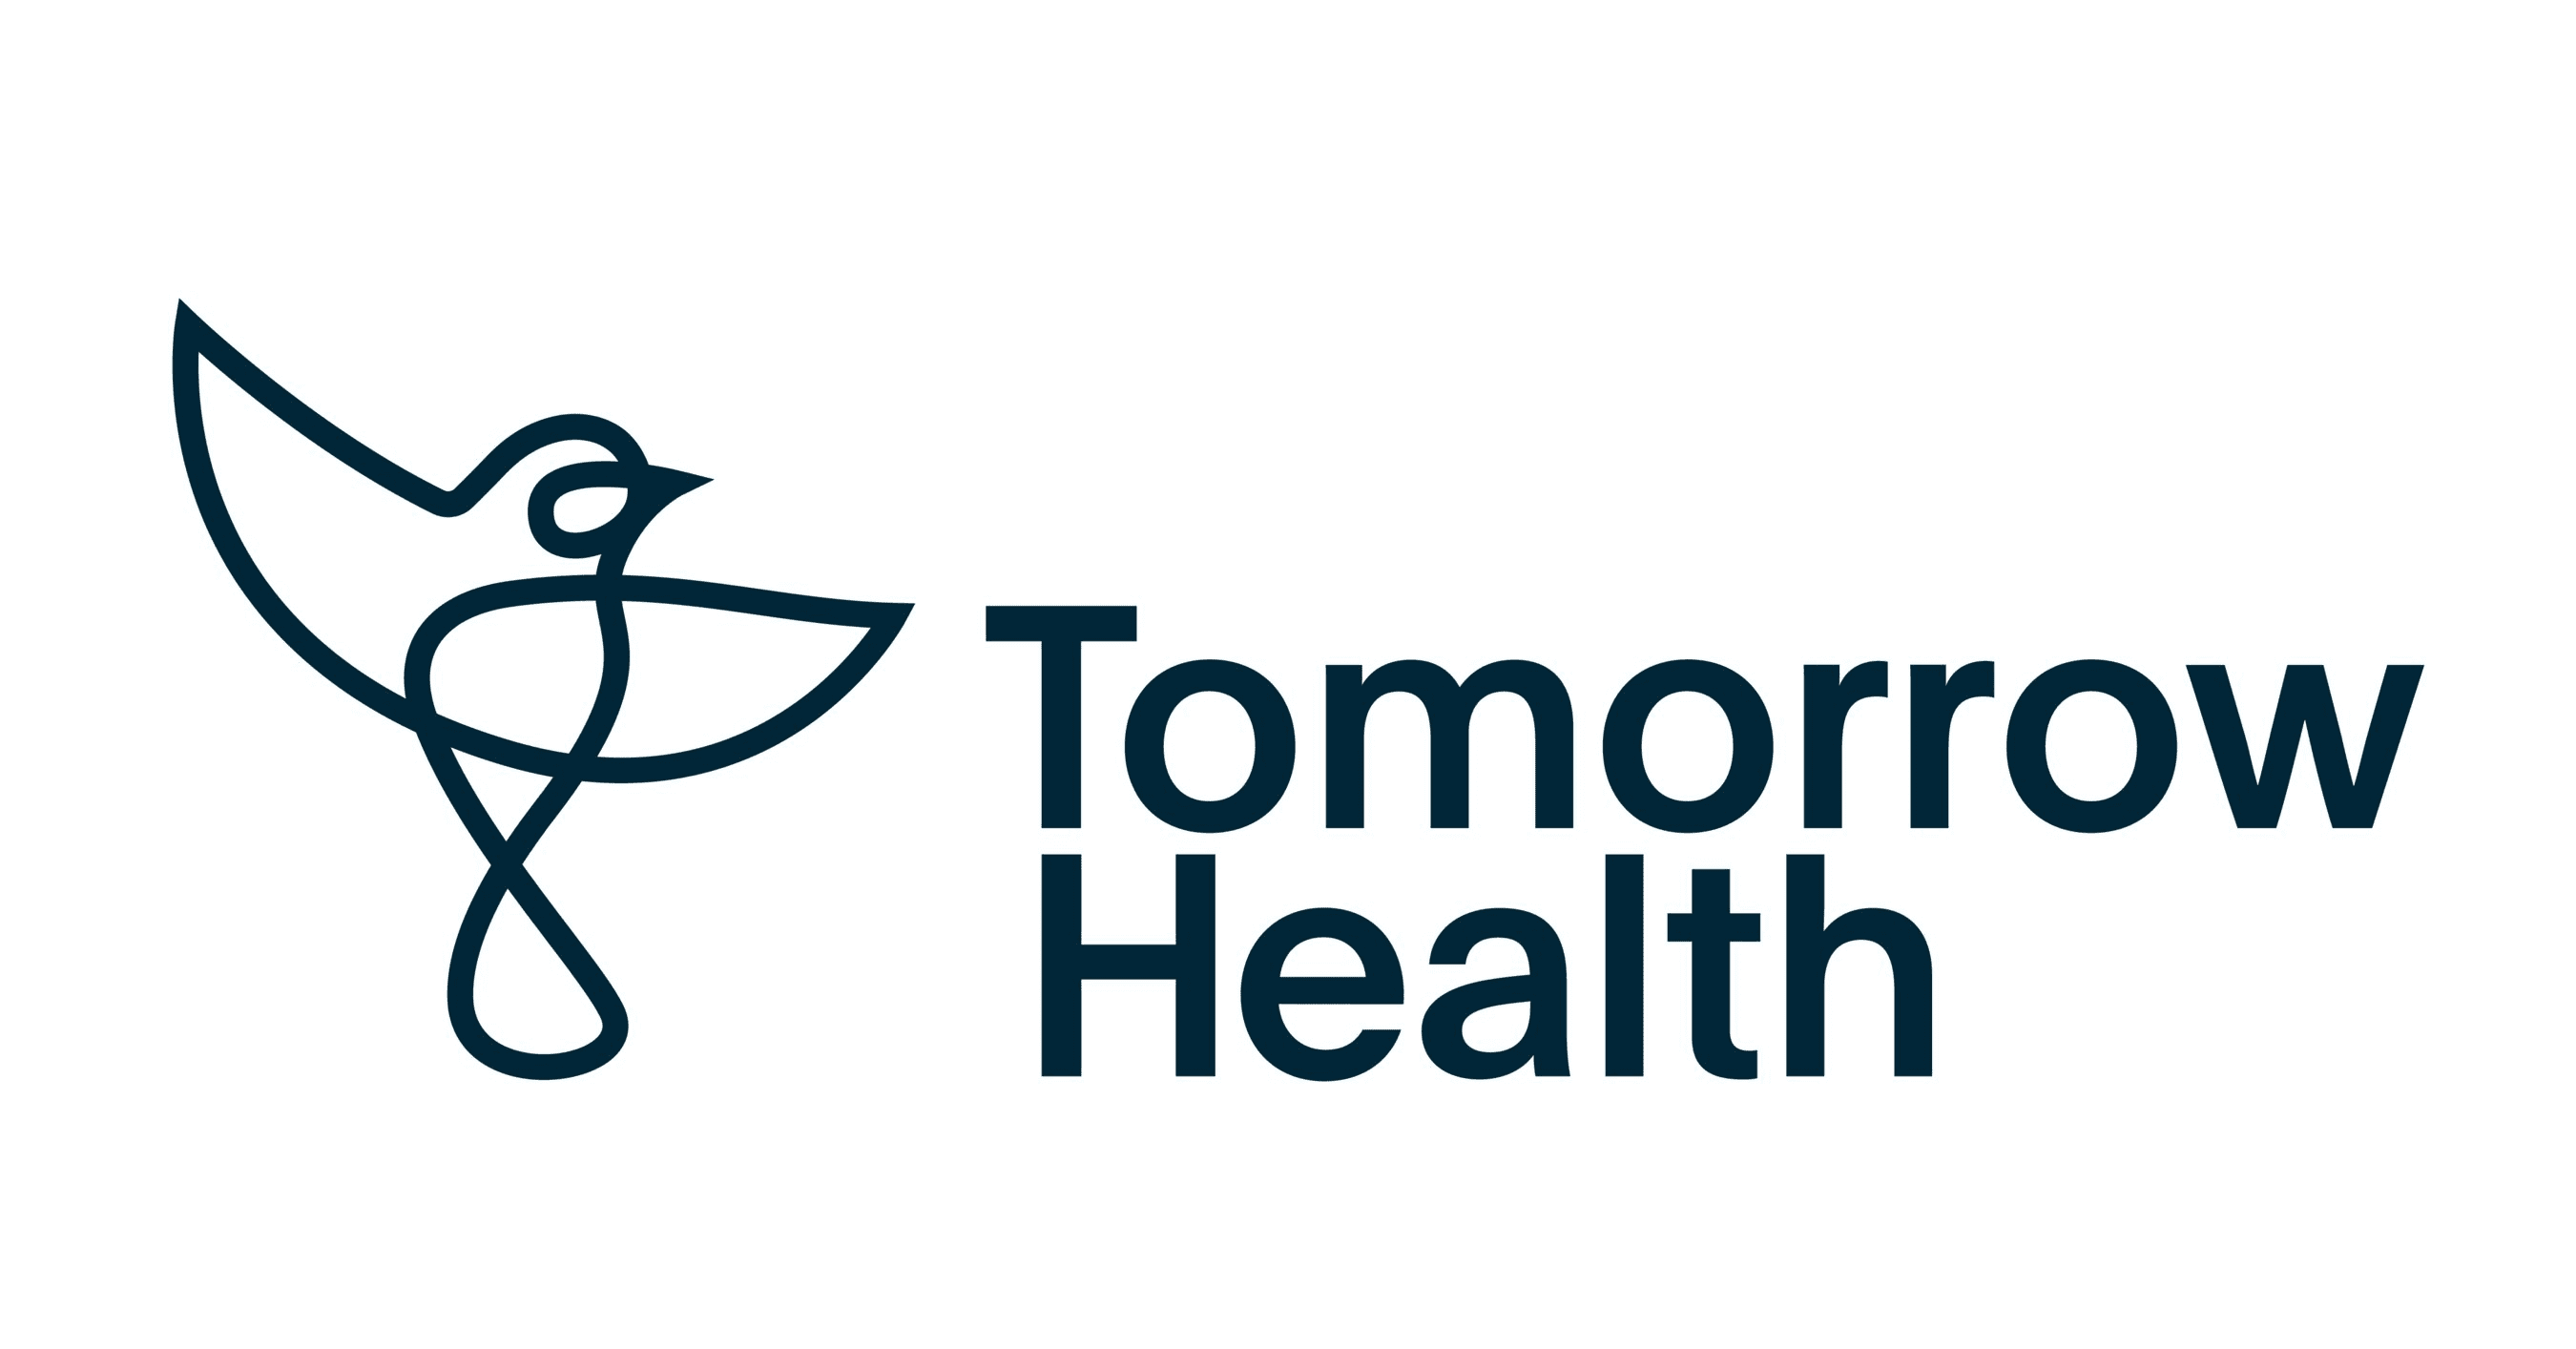 Tomorrow Health Shutters Medical Supply Business